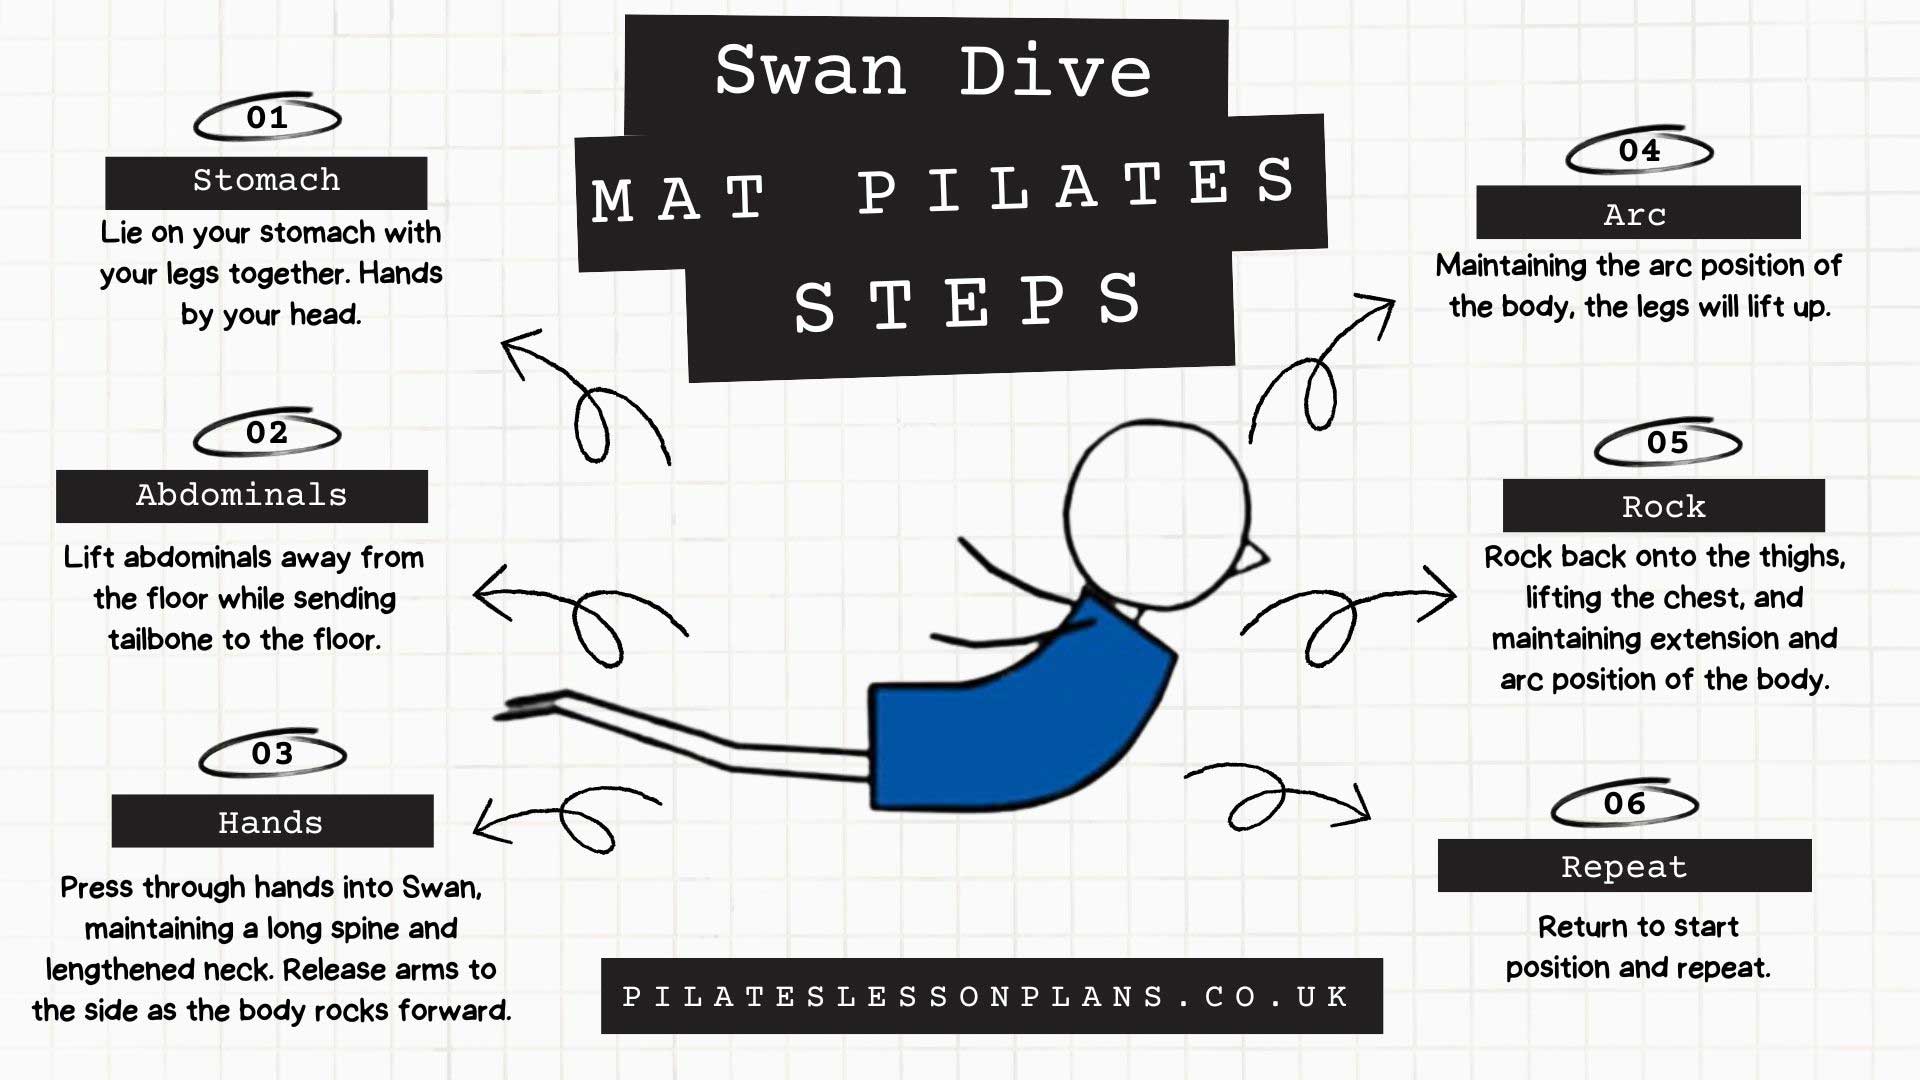 Swan Dive Pilates Steps Infographic